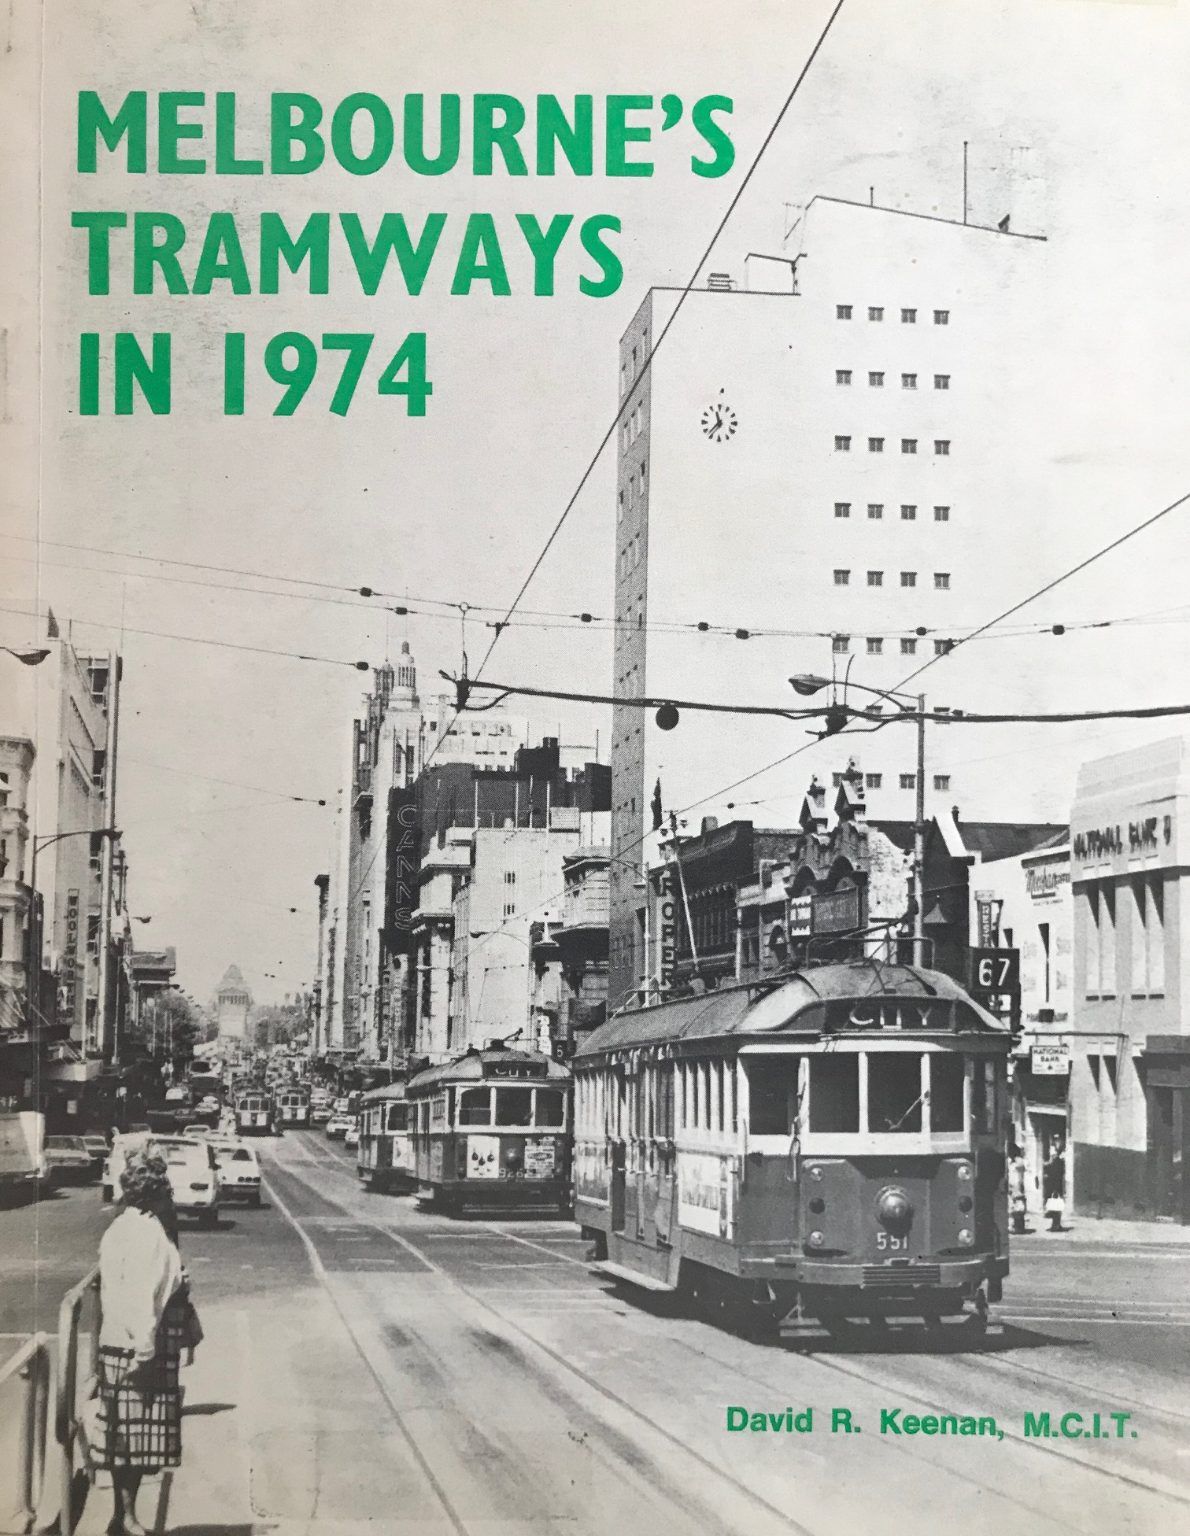 MELBOURNE'S TRAMWAYS IN 1974